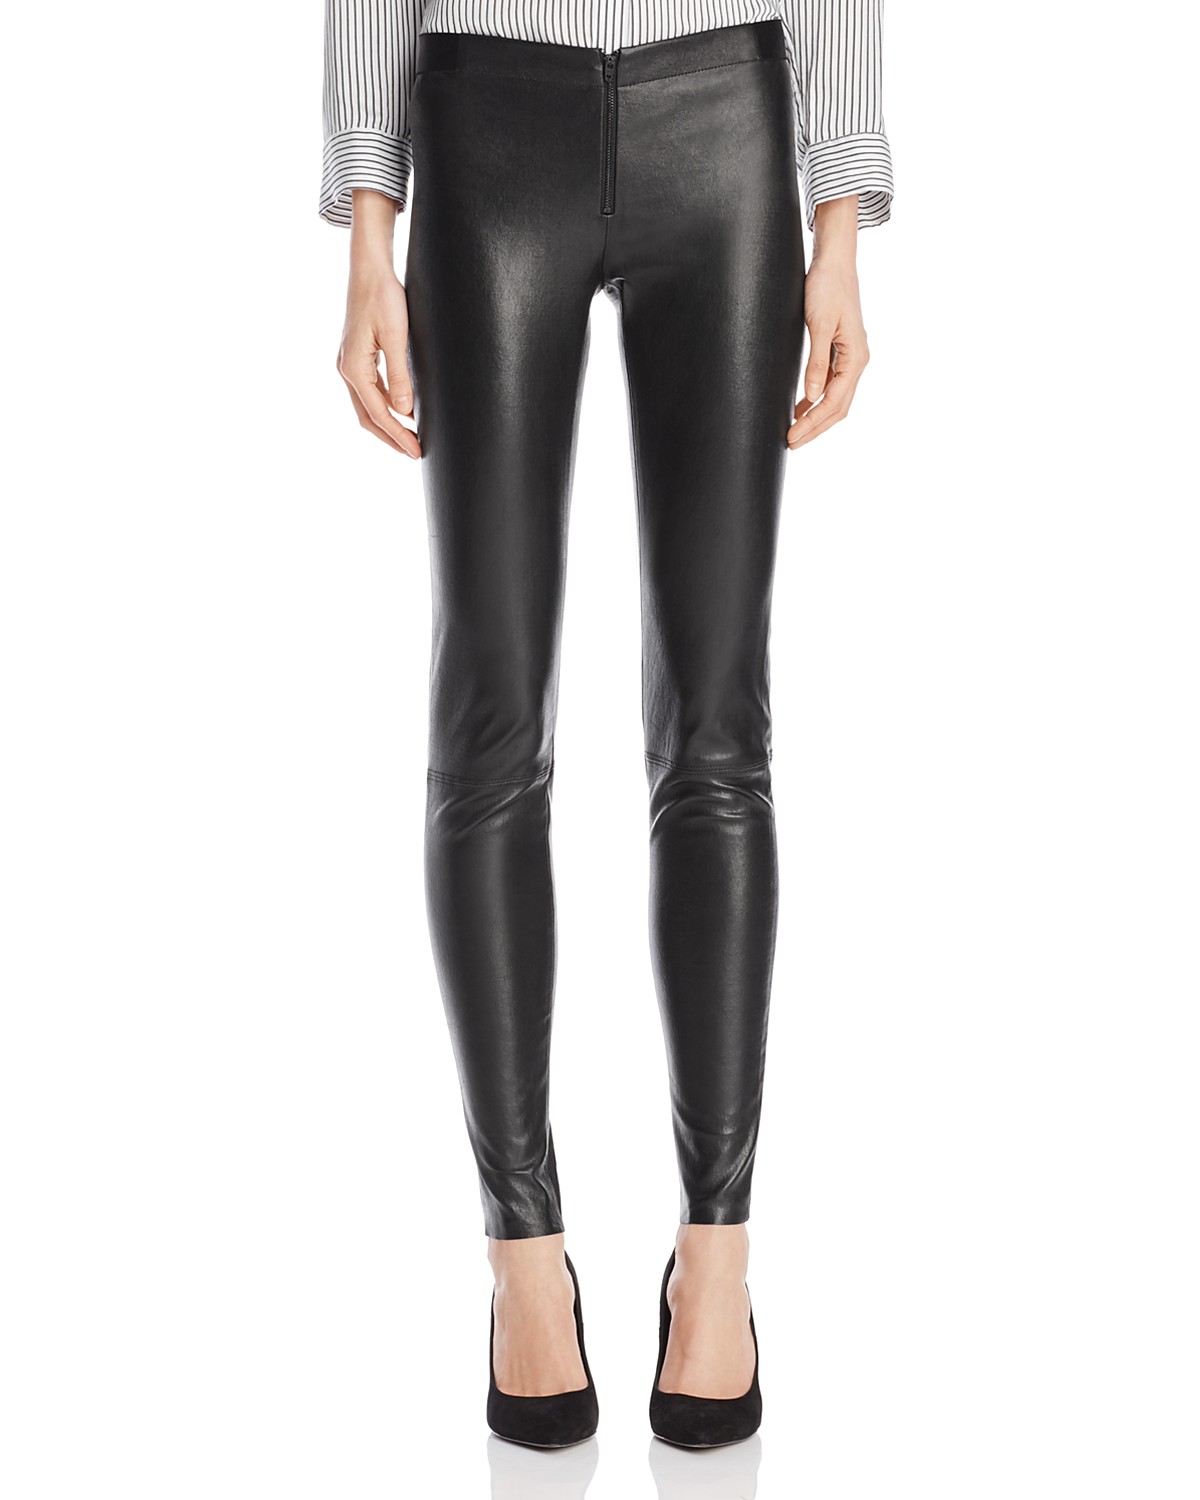 13 Faux Leather Pants to Wear in Spring and Beyond | Teen Vogue